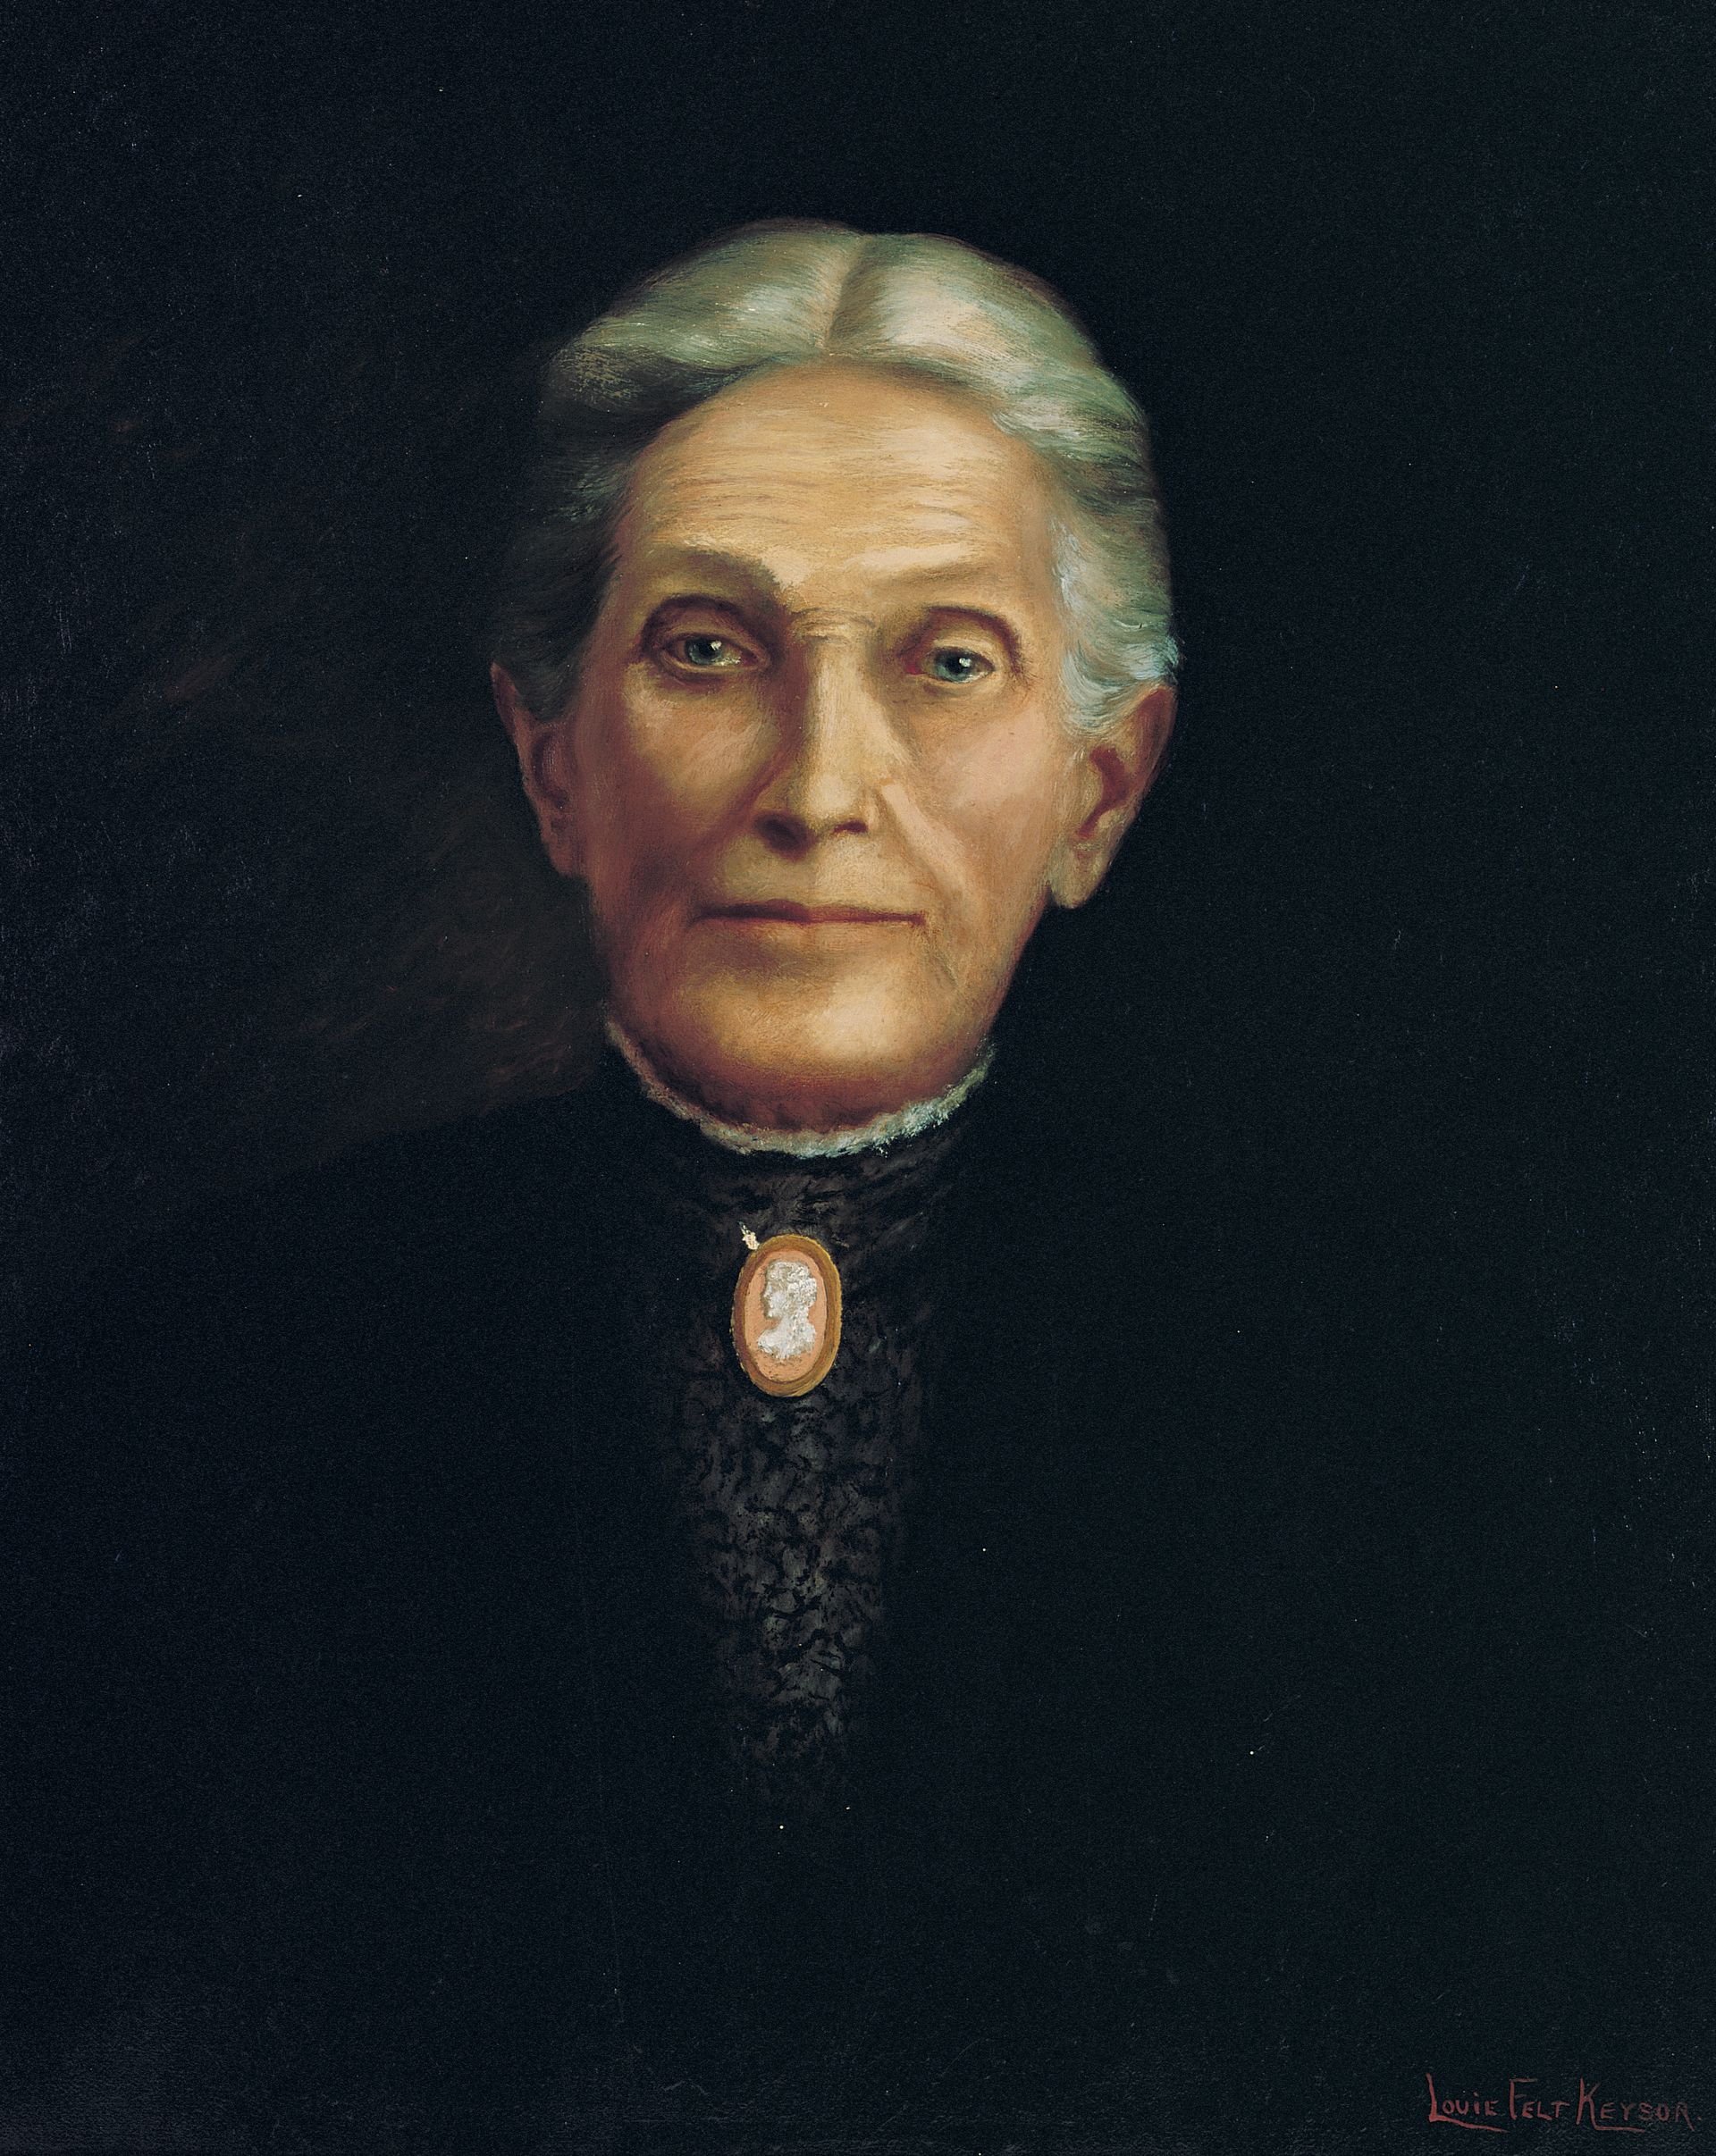 A photograph of Aurelia Spencer Rogers, who is known as the founder of the Primary, which was organized in 1878.